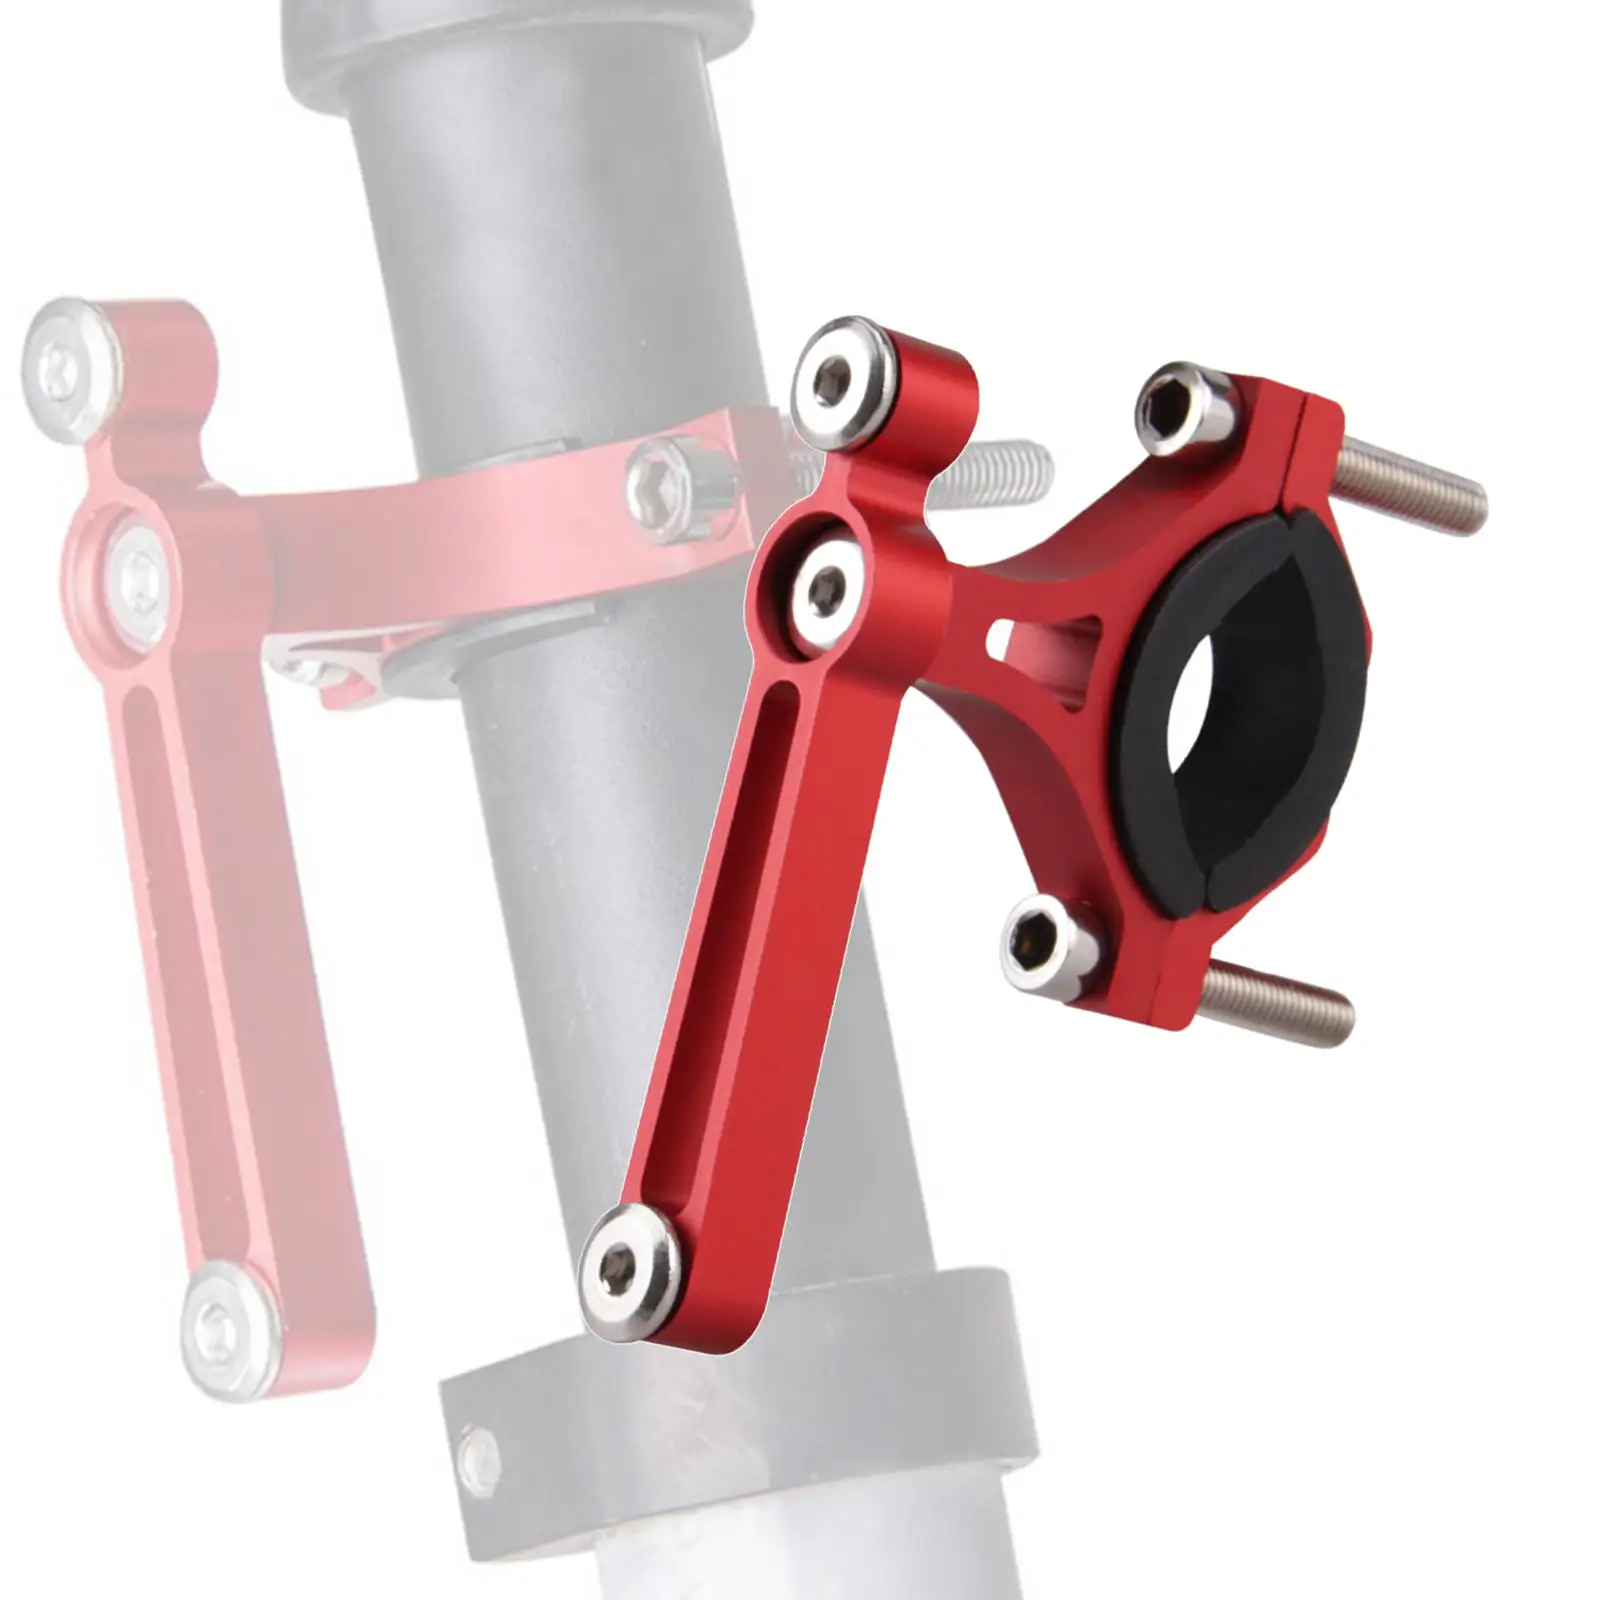 Bike Water Bottle Holder Clamp Clip, MTB Bicycle Cup Mount Adapter for Seat Post or Handlebar